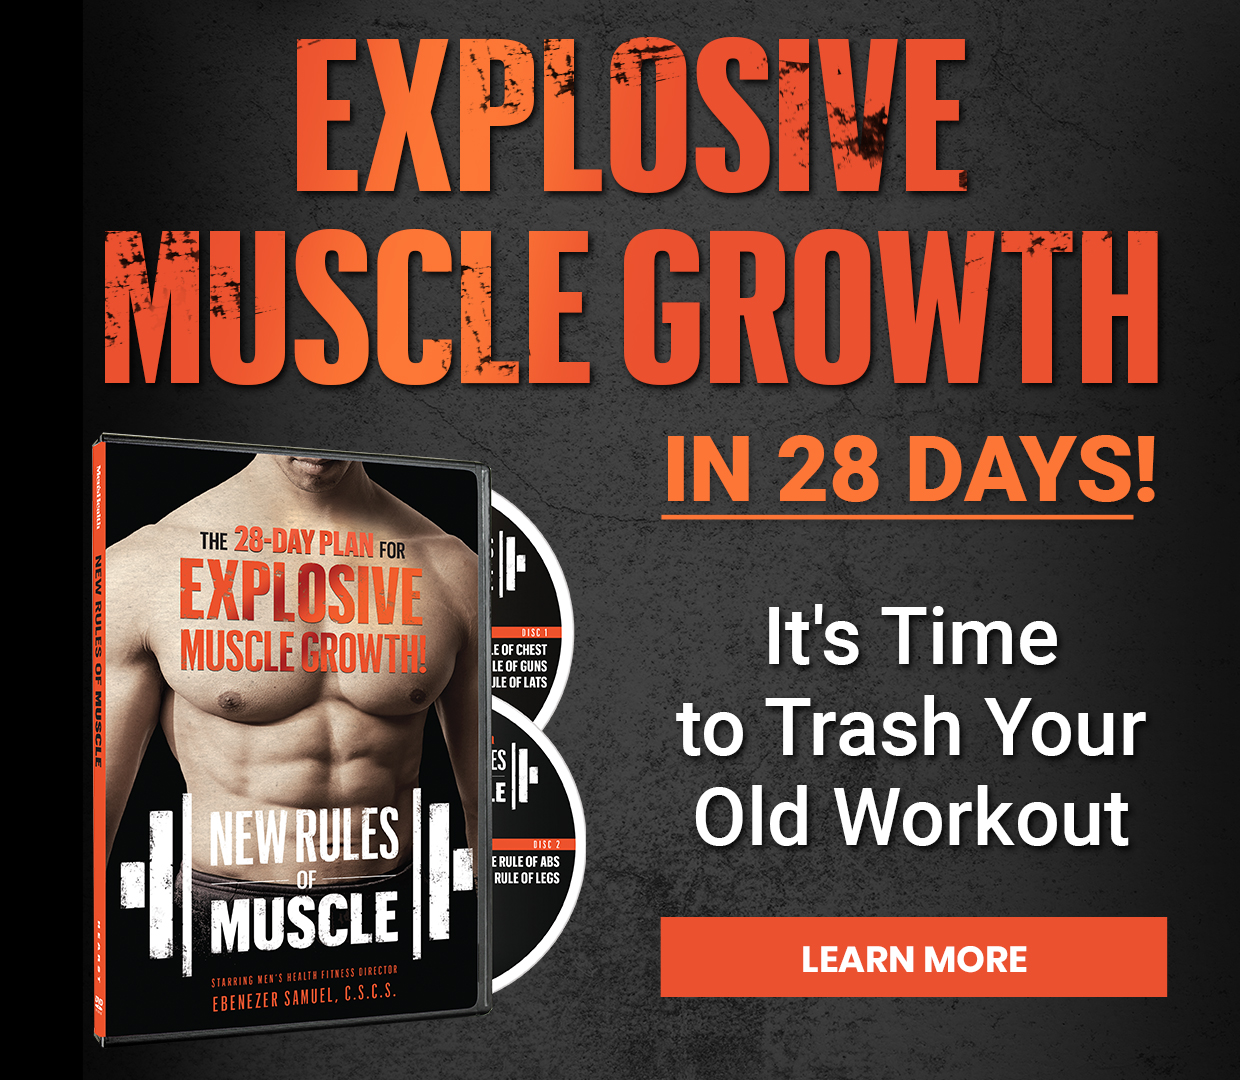 It's time to trash your old workout